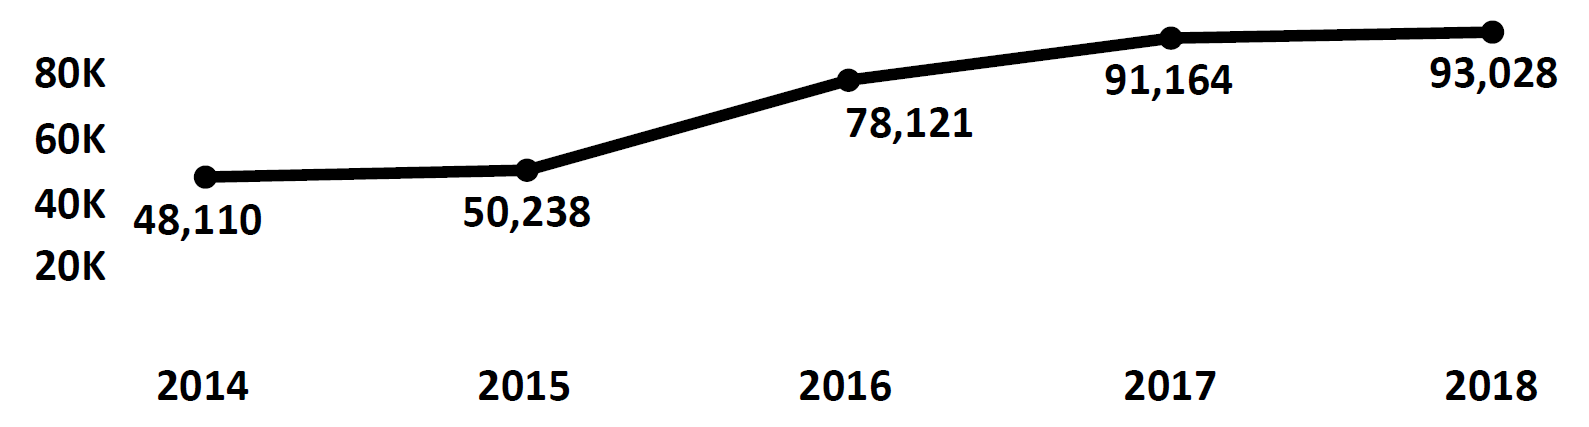 Graph of Do Not Call complaints recorded in Minnesota from fiscal year 2014 to fiscal year 2018. In 2014 there were 48,110 complaints filed, which increased each year to peak at 93,028 in 2018.